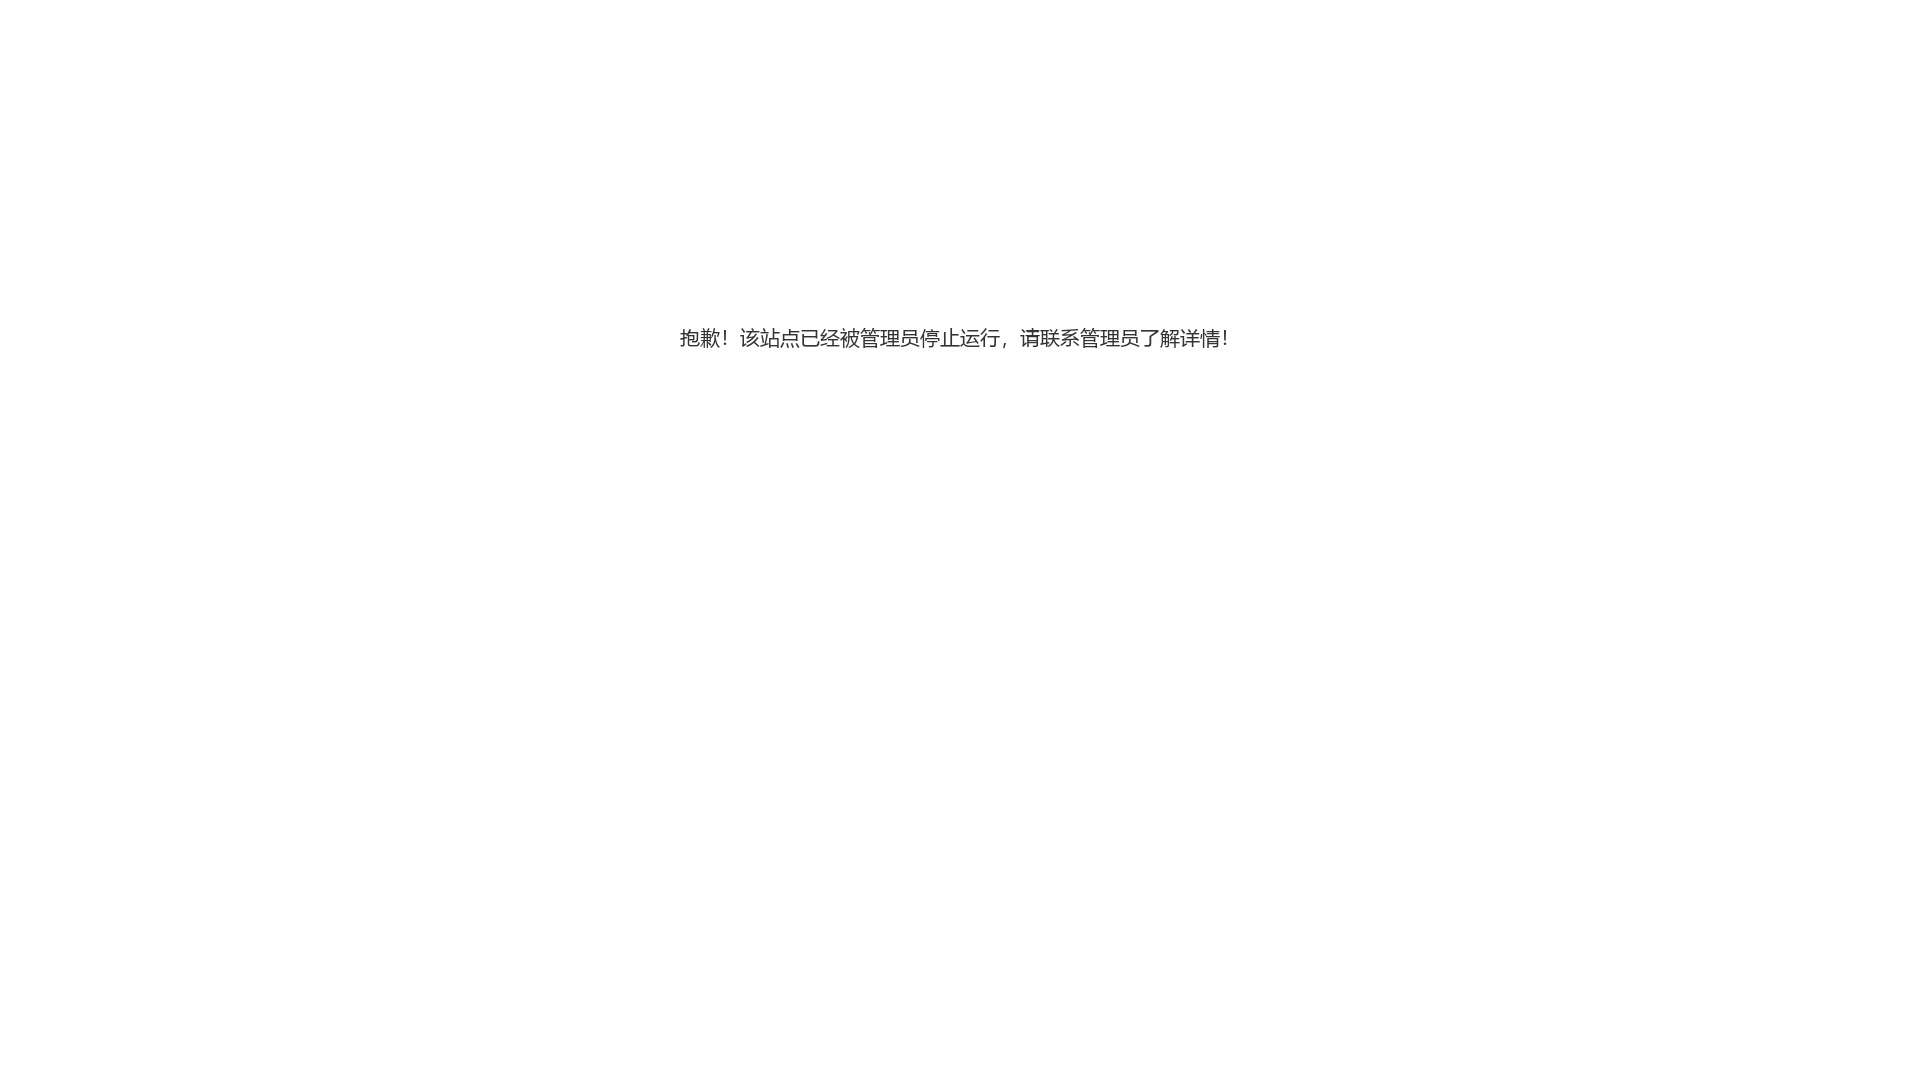 Test Page for Apache Installation截图时间：2024-01-10